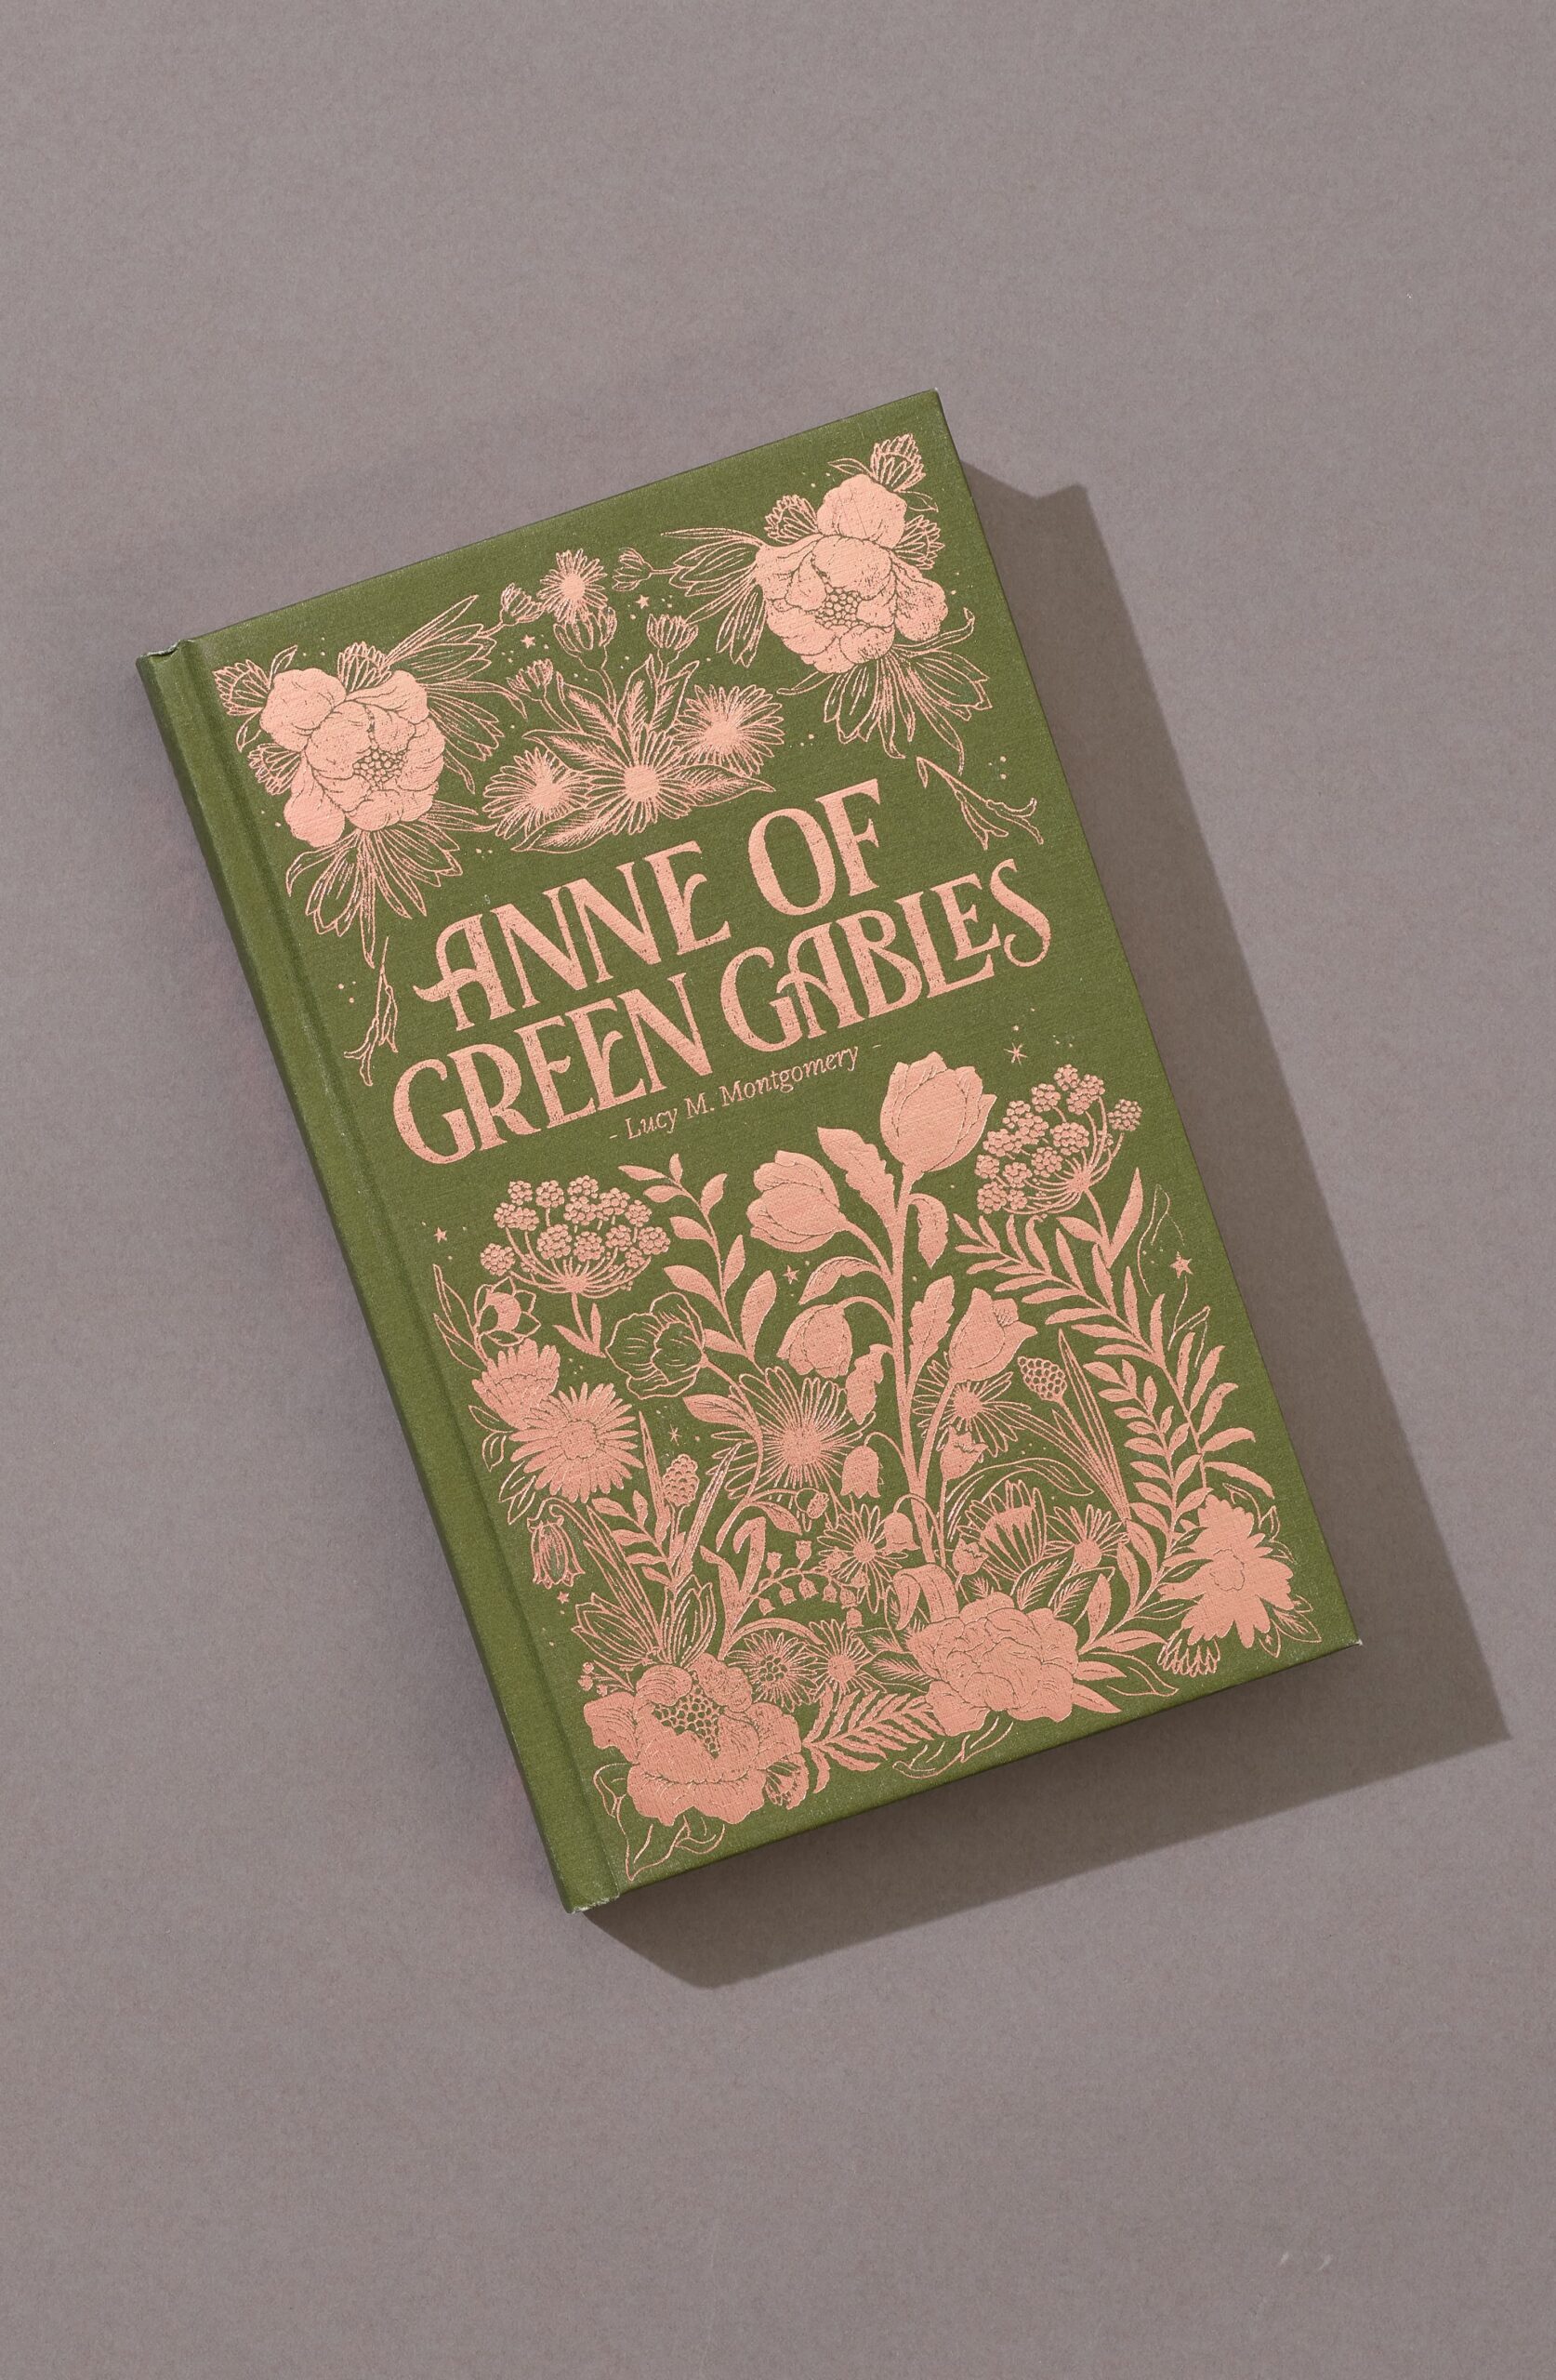 Anne of green gables Luxe cover